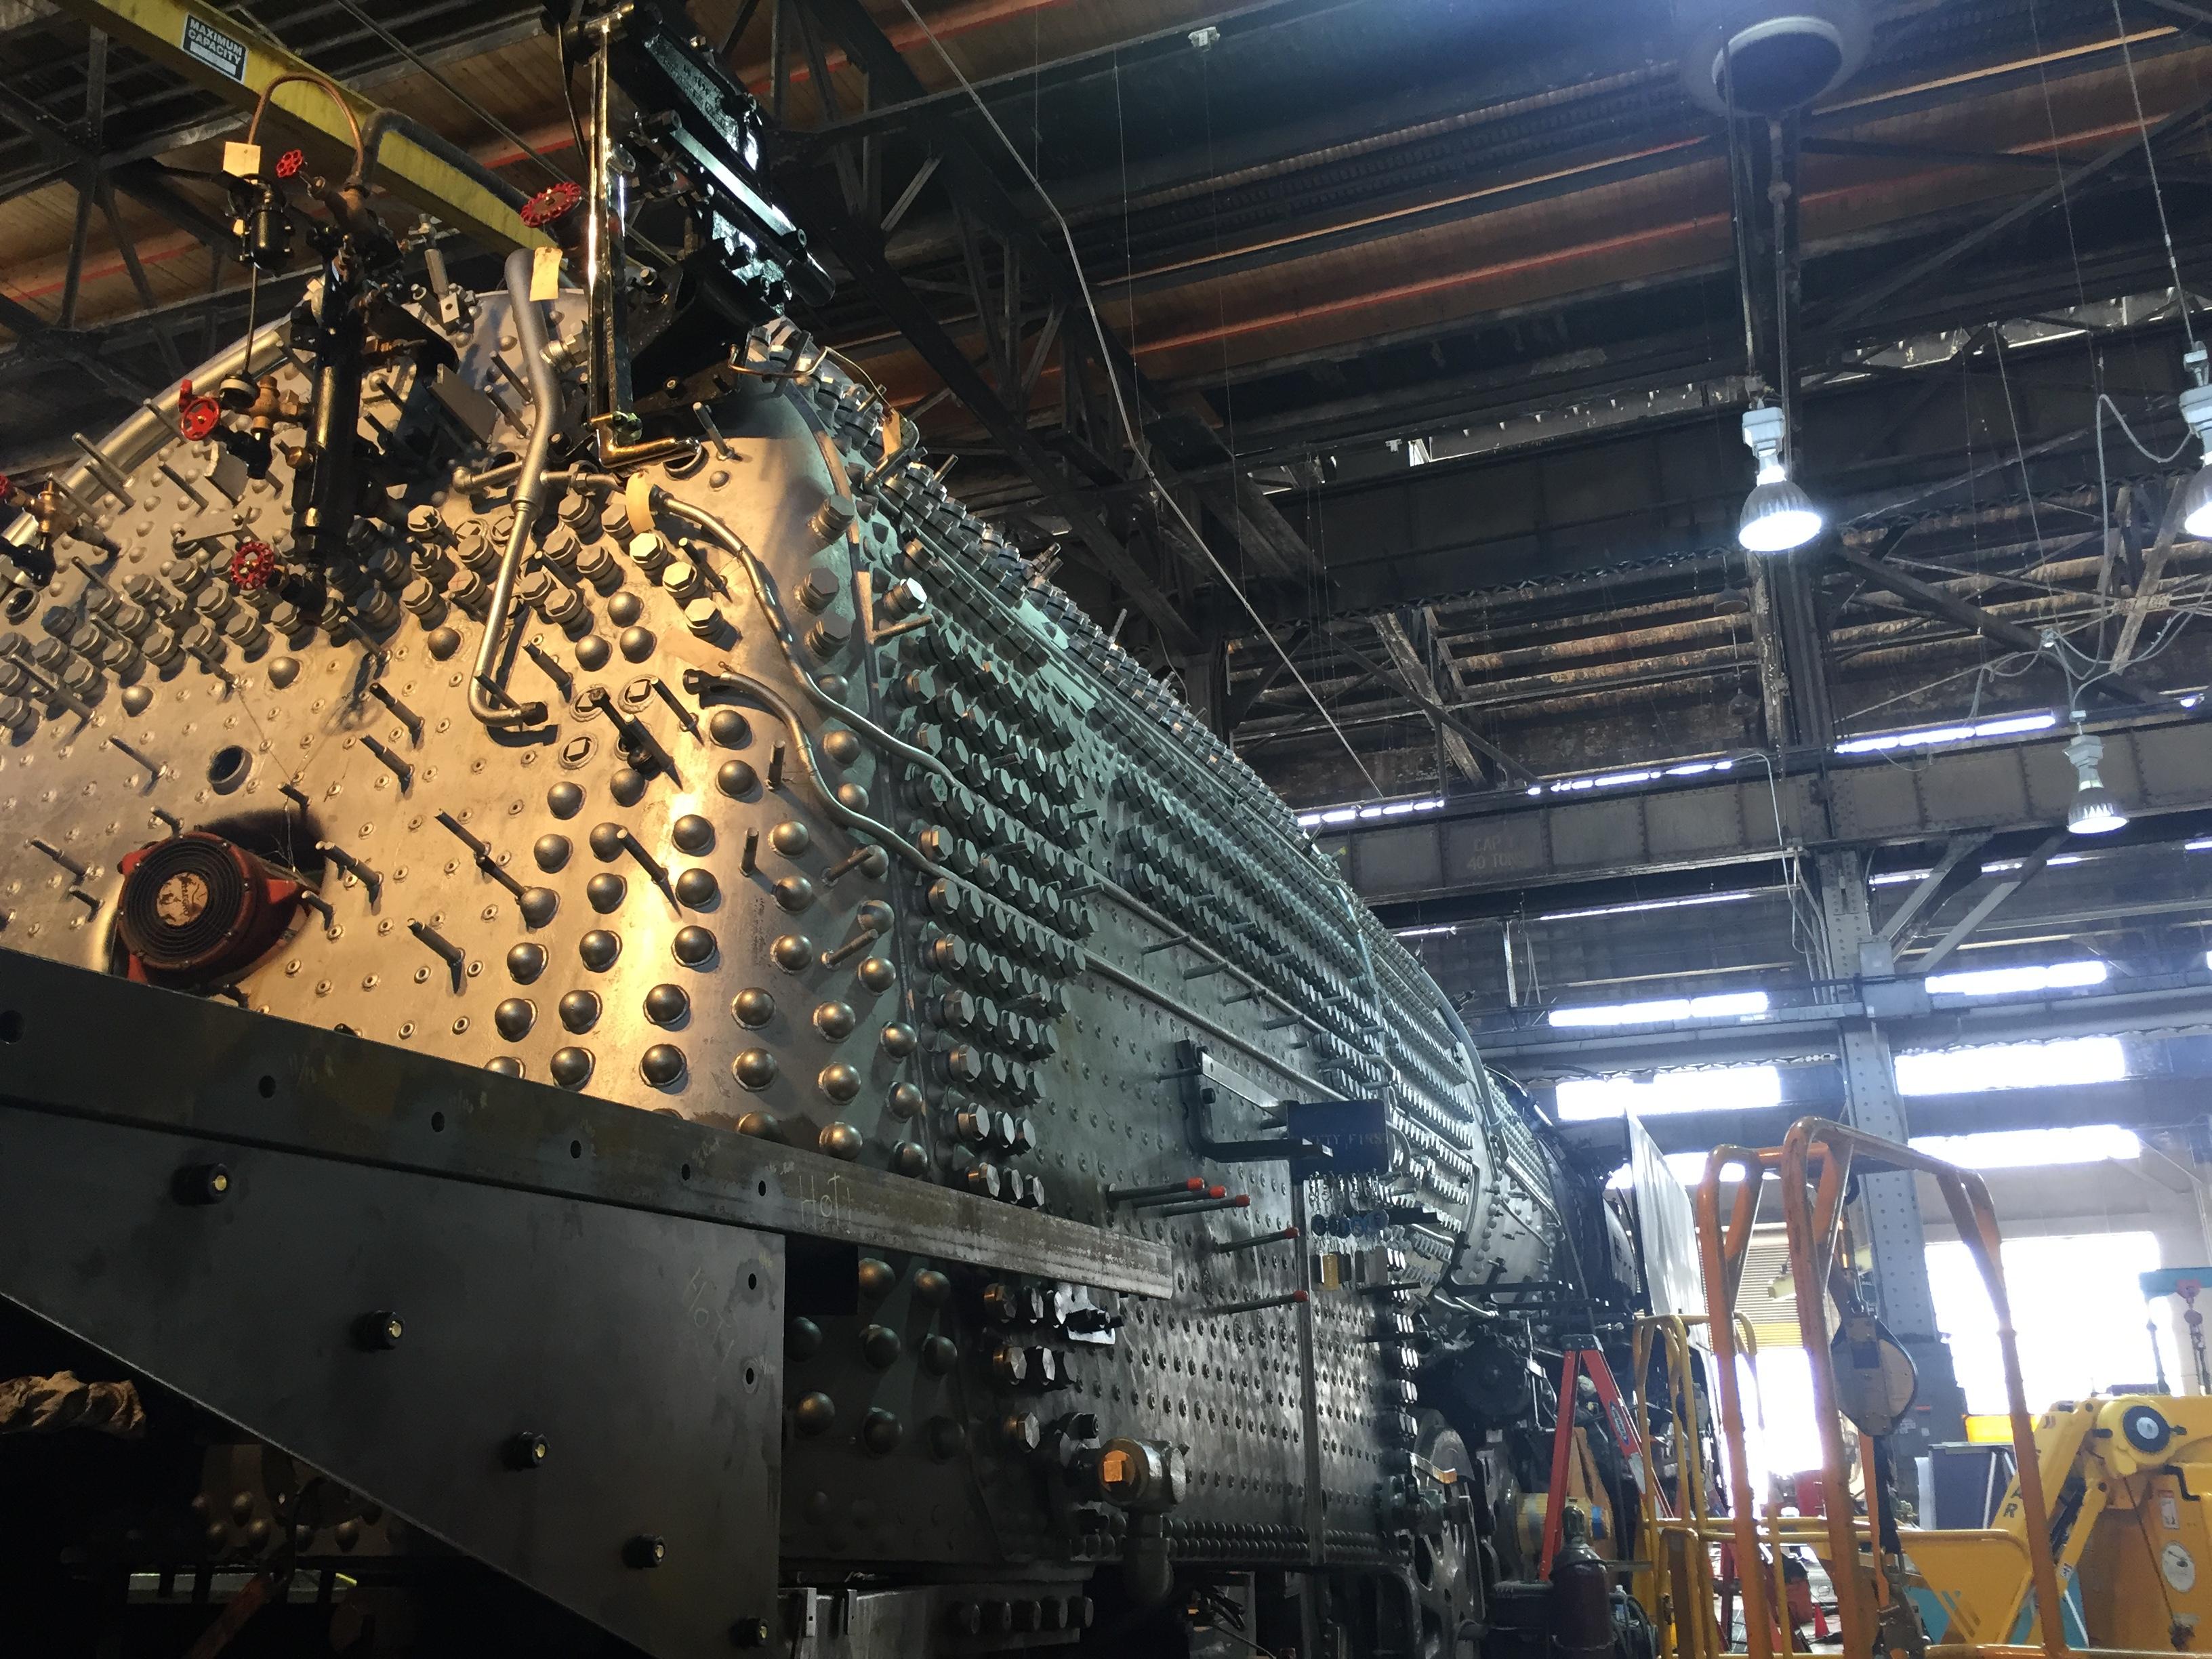 Locomotive No. 844 being reassembled in Steam Shop - May 2016.